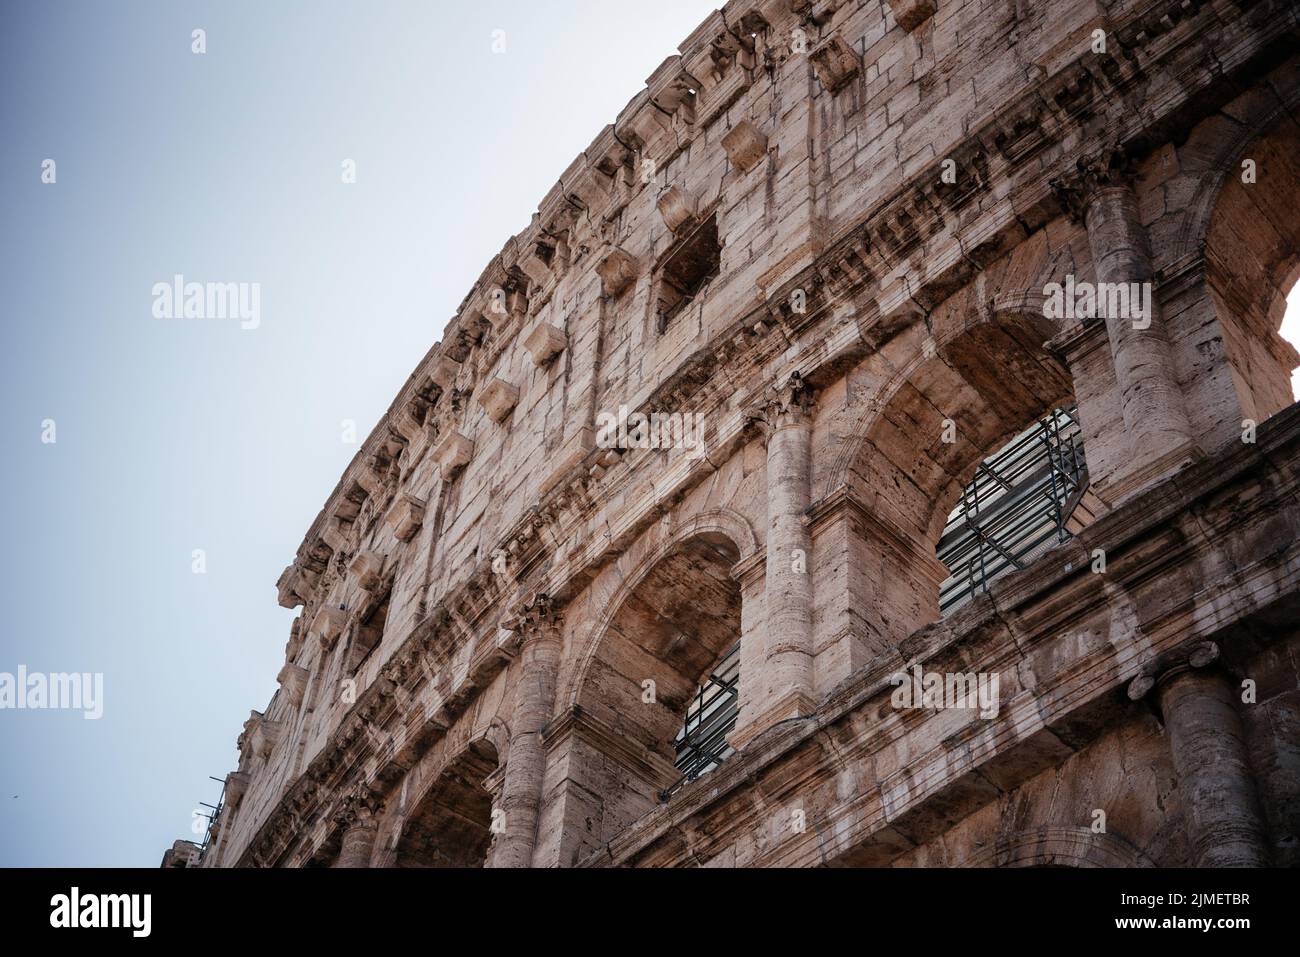 Exterior view of facade of Colosseum of Rome, Italy, UNESCO World Heritage Site. Coloseo, Flavian Amphitheater the symbol of ancient Roman Empire Stock Photo